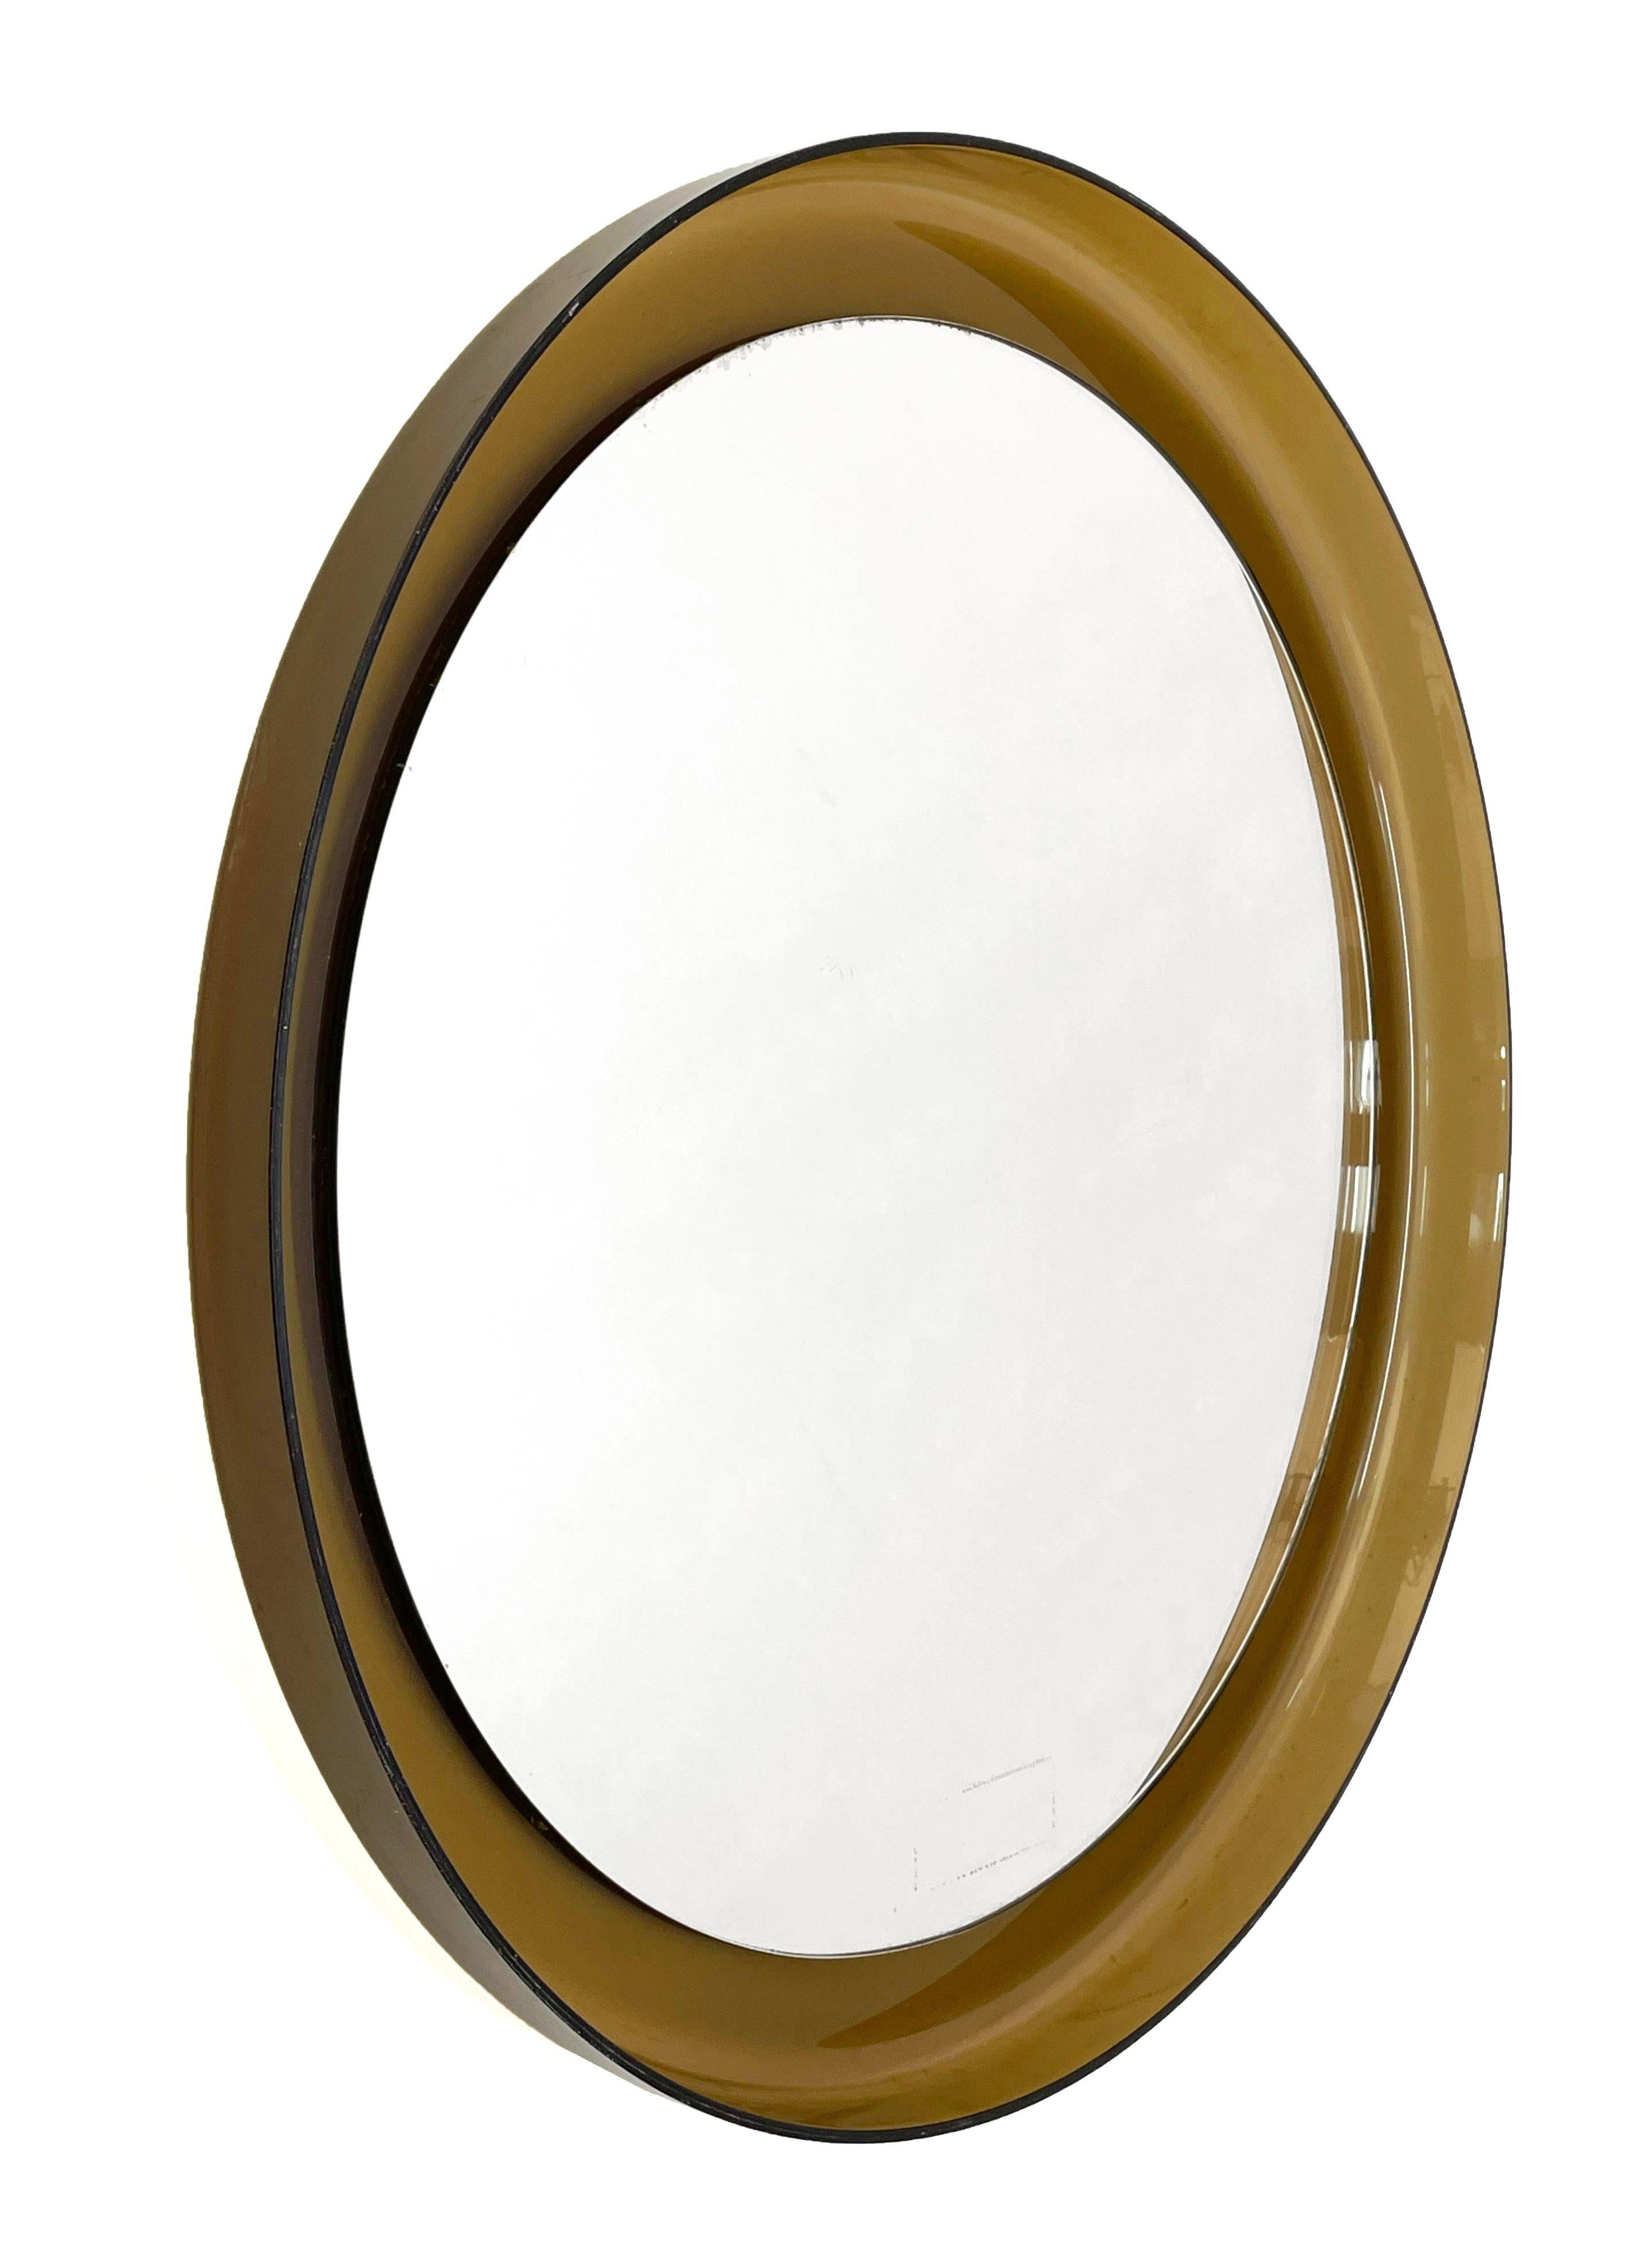 Midcentury Guzzini Italian Round Lucite Smoked Brown Wall Mirror, 1960s For Sale 10